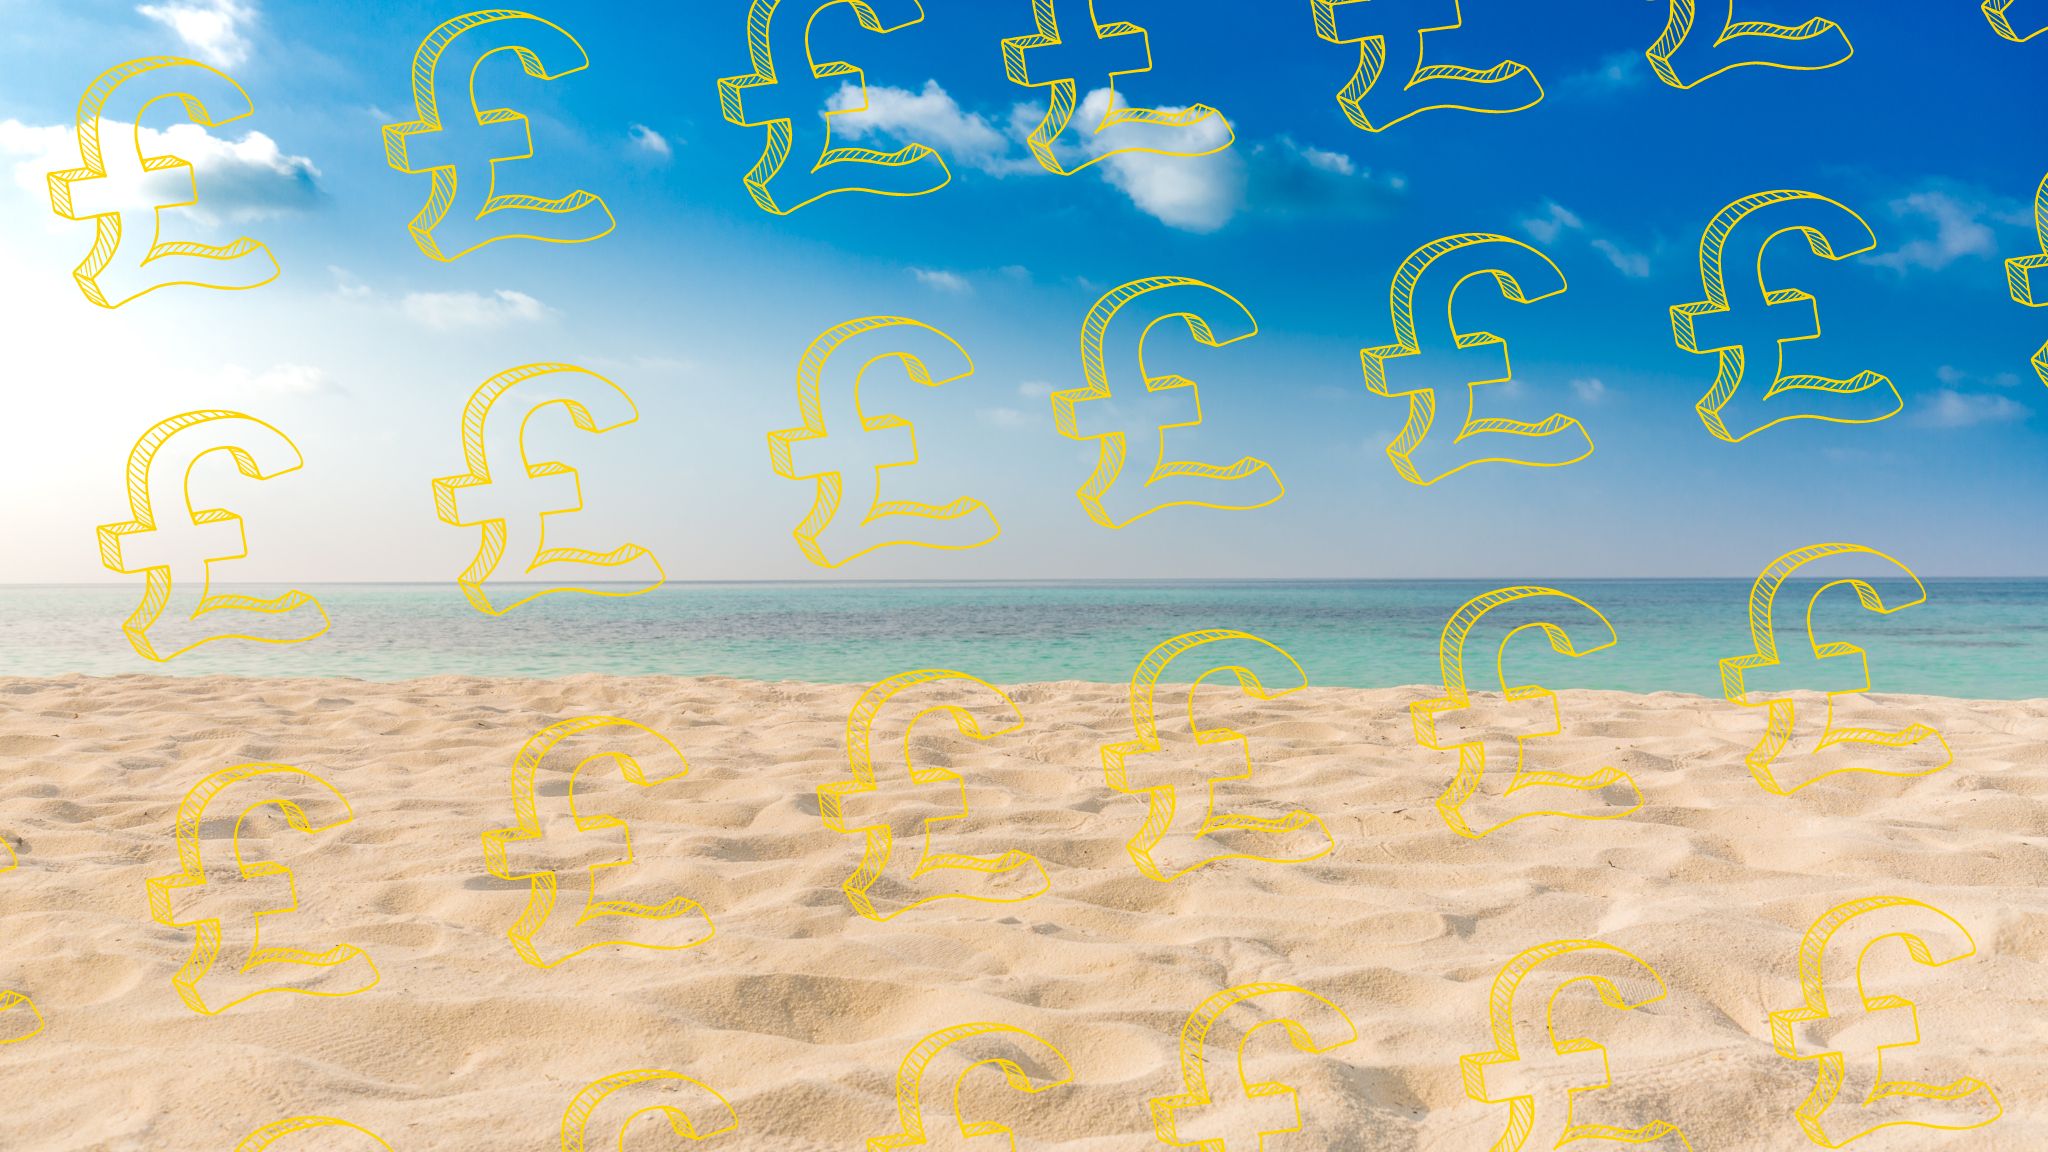 More for ya wonga: 5 places where your money goes further